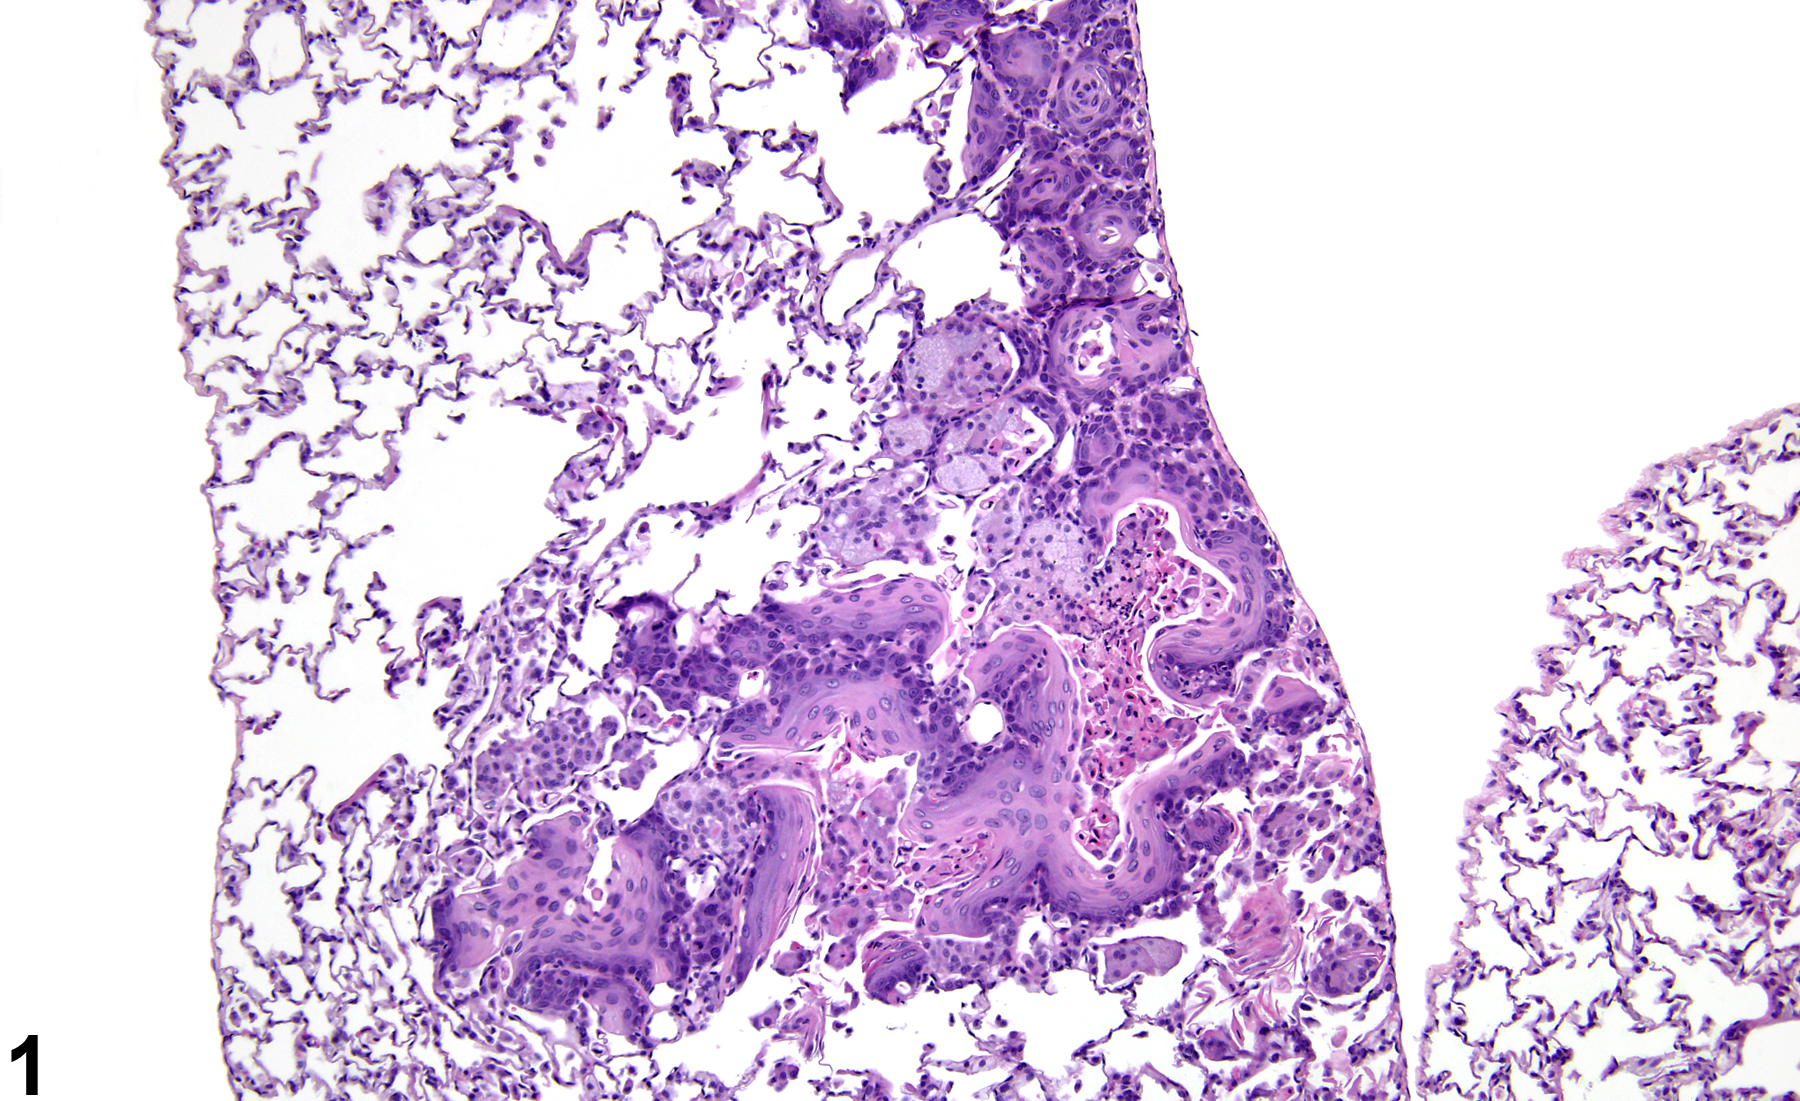 Image of alveolar squamous metaplasia in the lung from a female Harlan Sprague-Dawley rat in a subchronic study